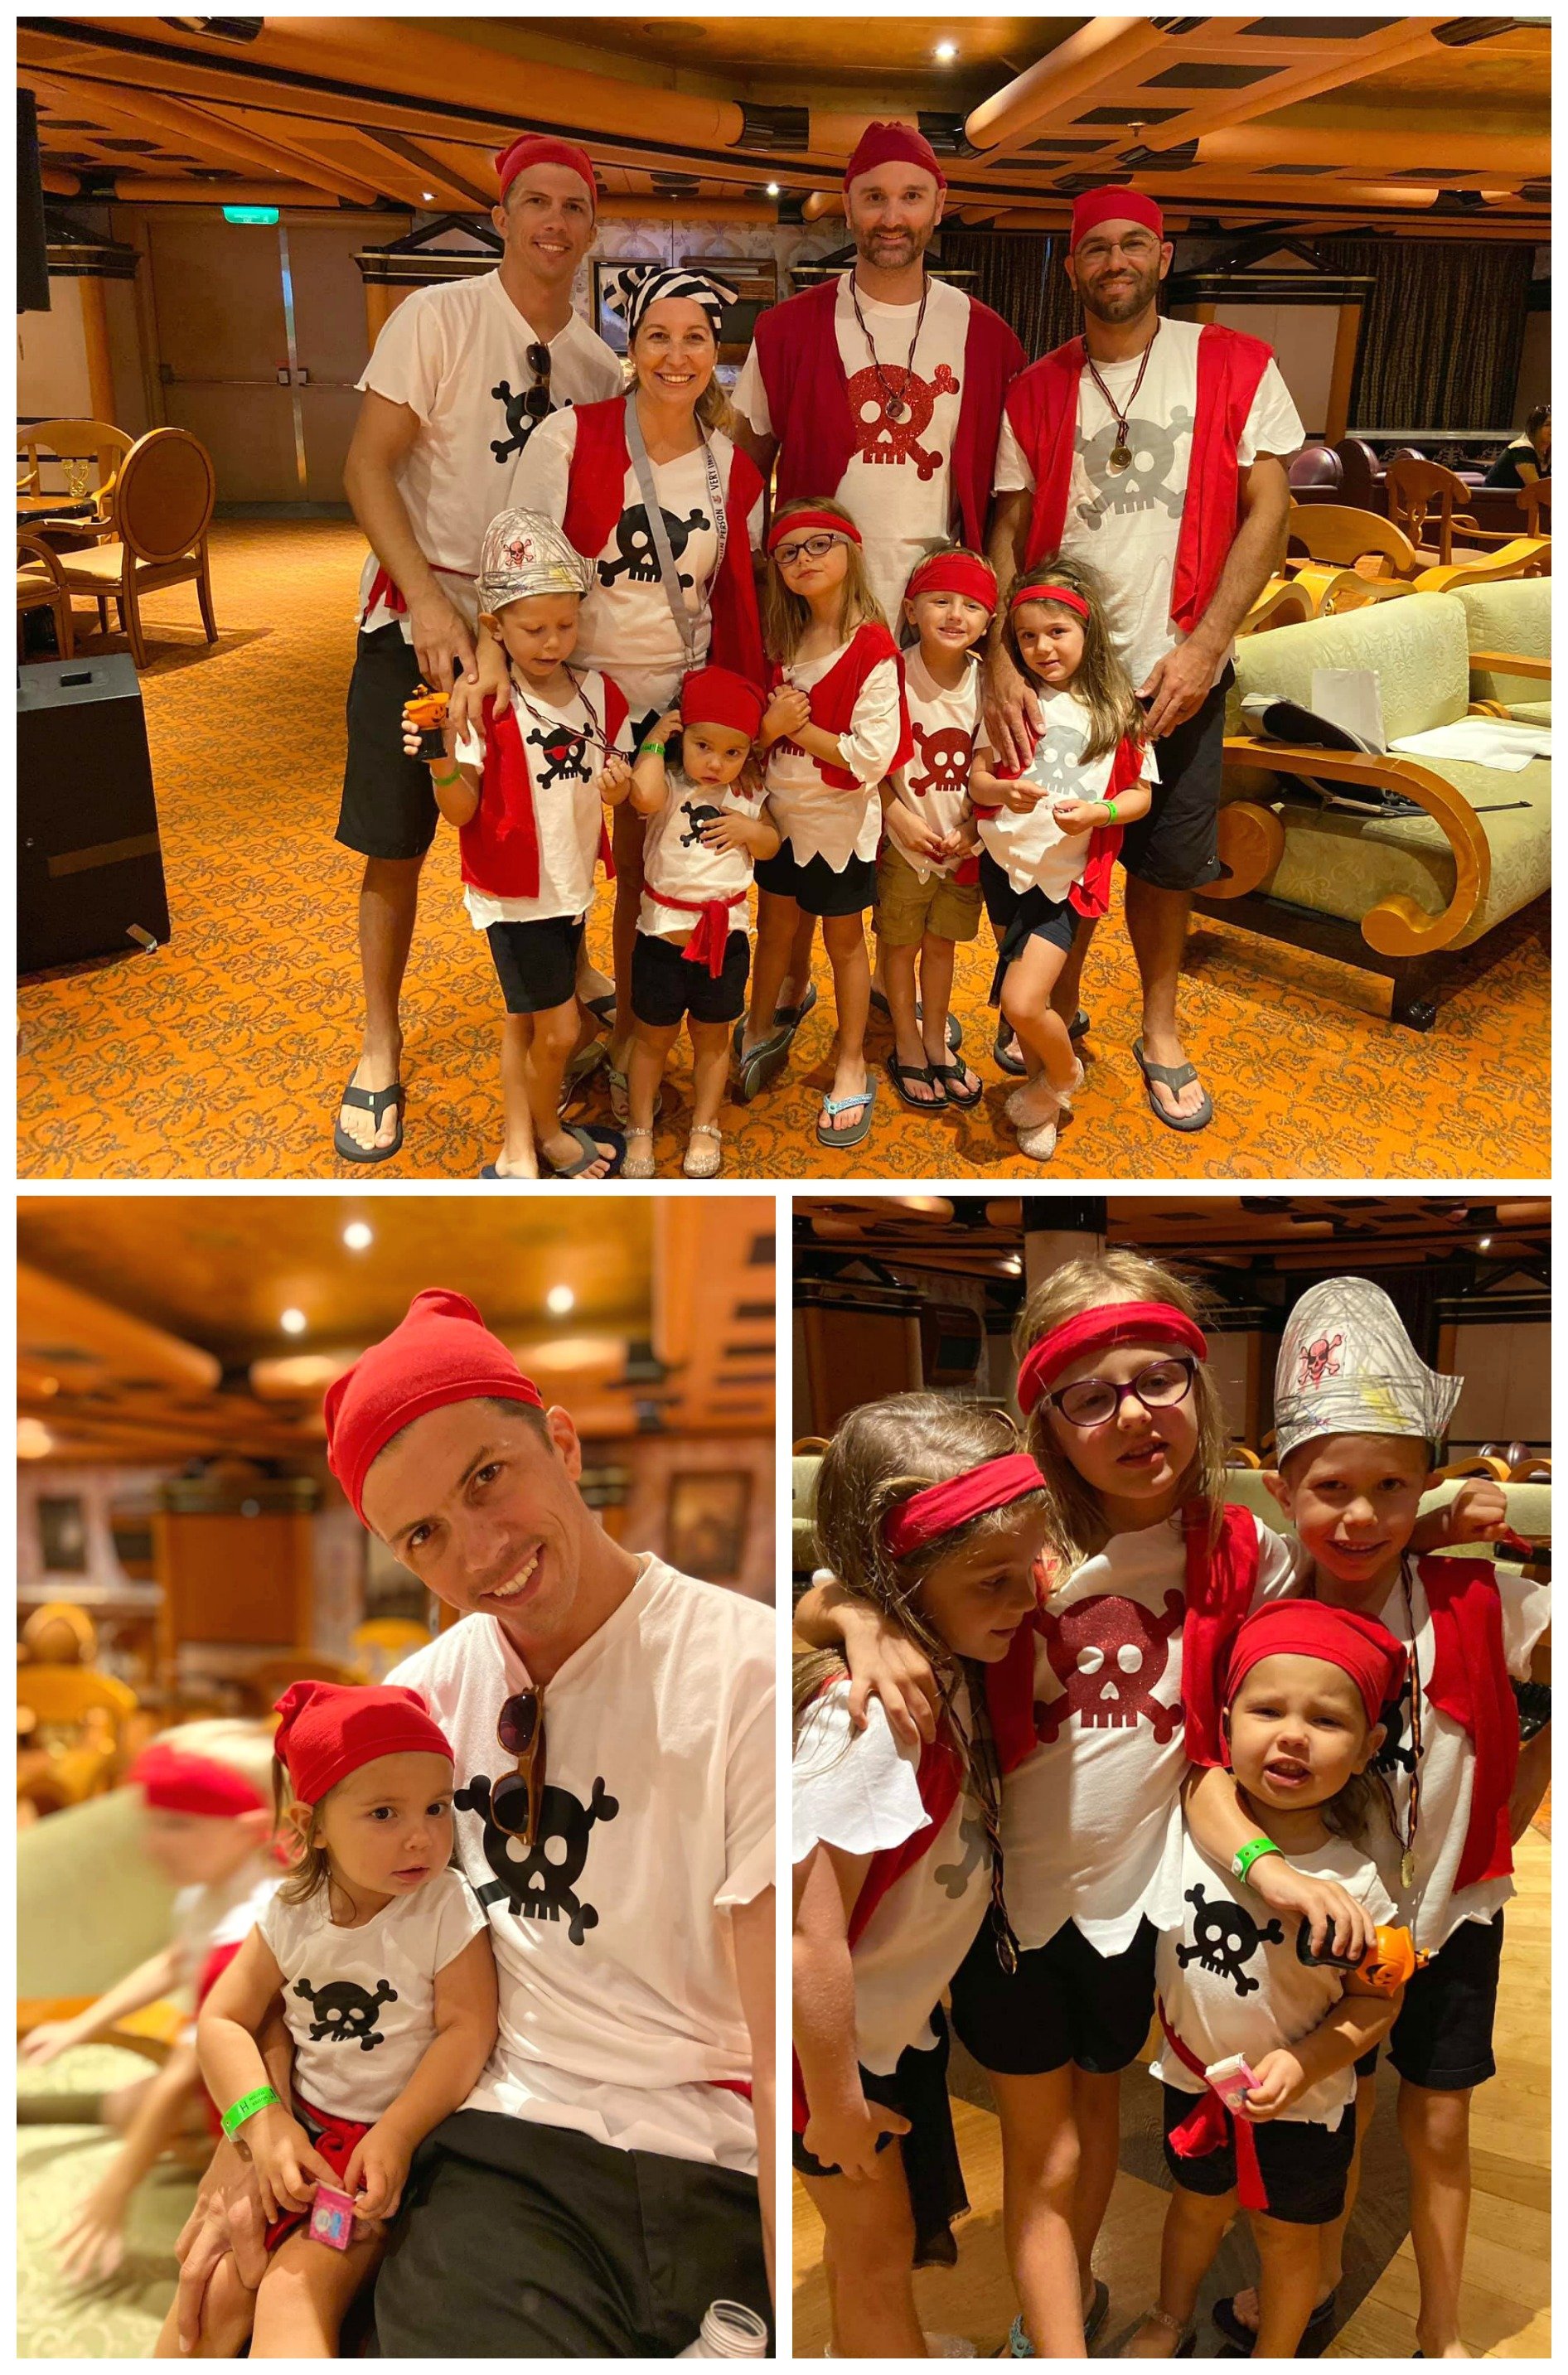 4 adults dressed as pirates with 5 kids dressed as pirates.